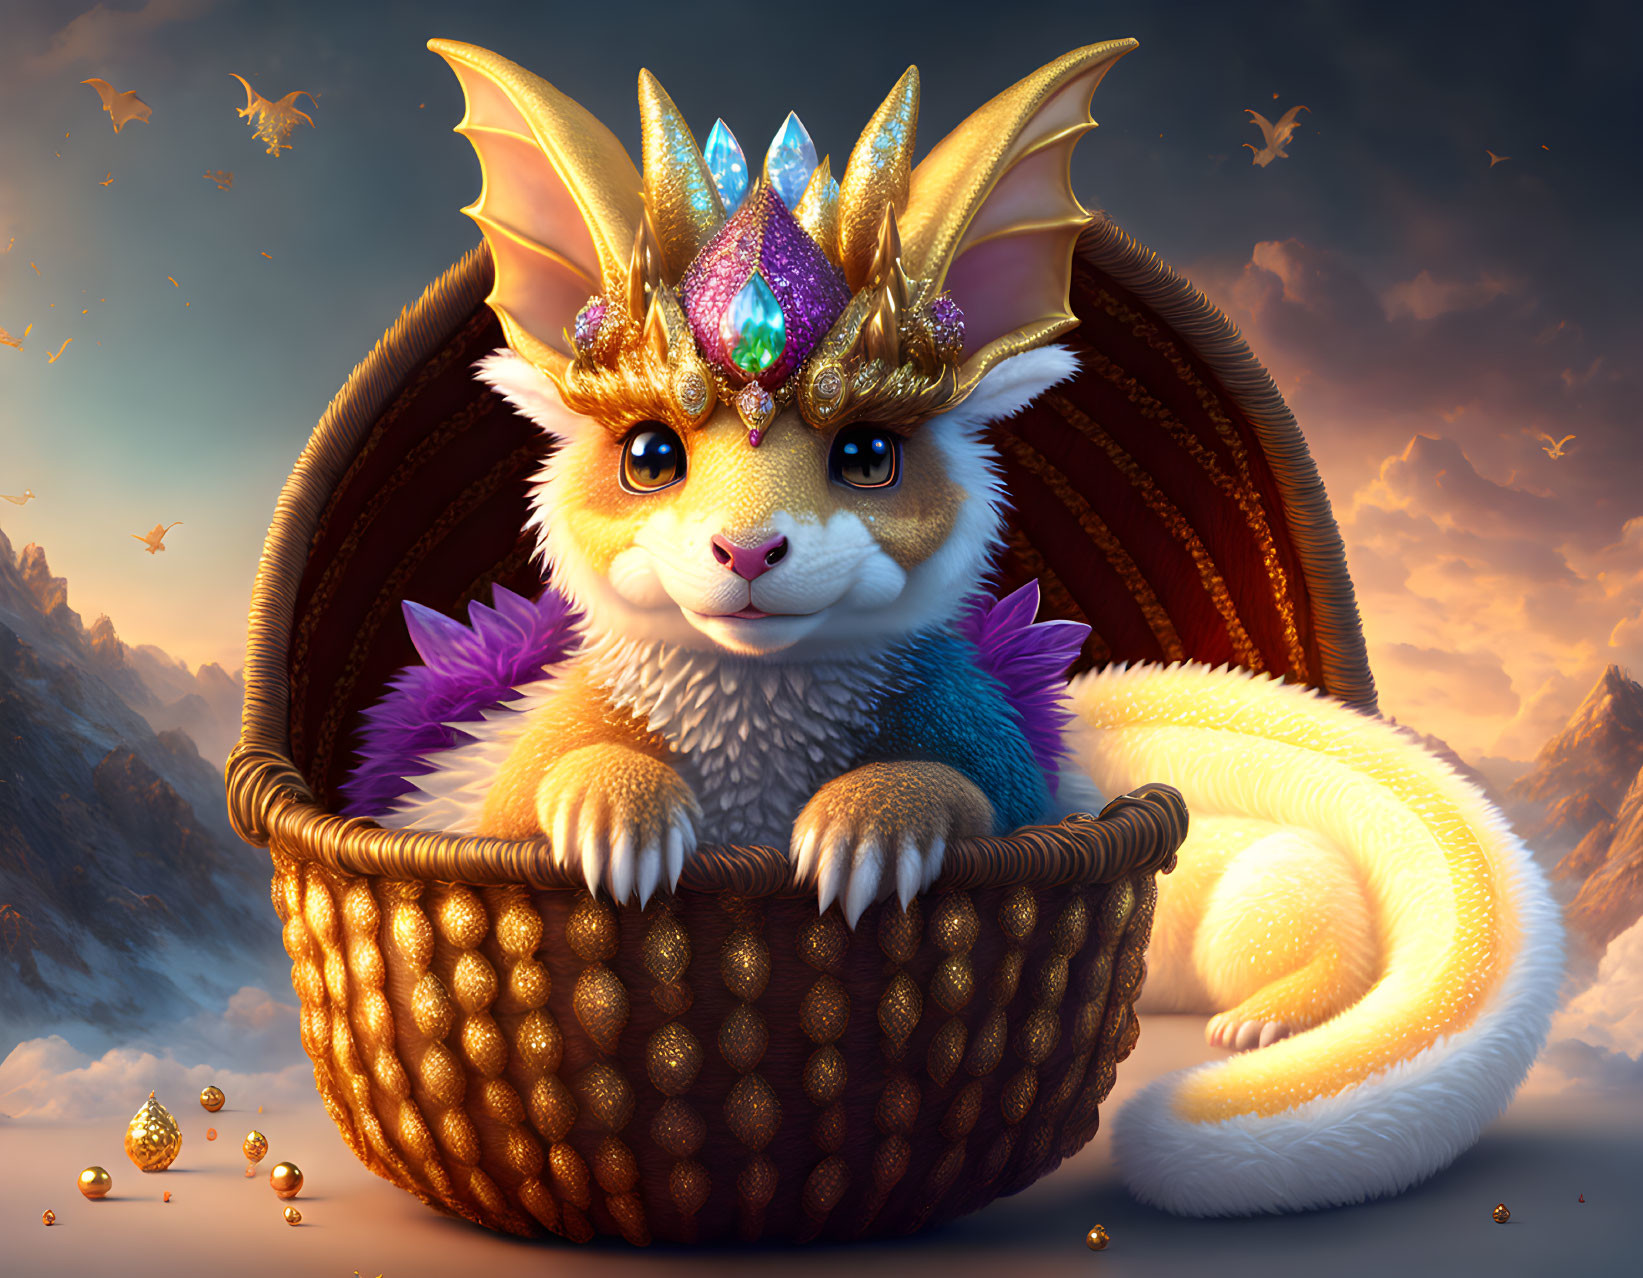 Whimsical creature with crown in woven basket on mountain backdrop